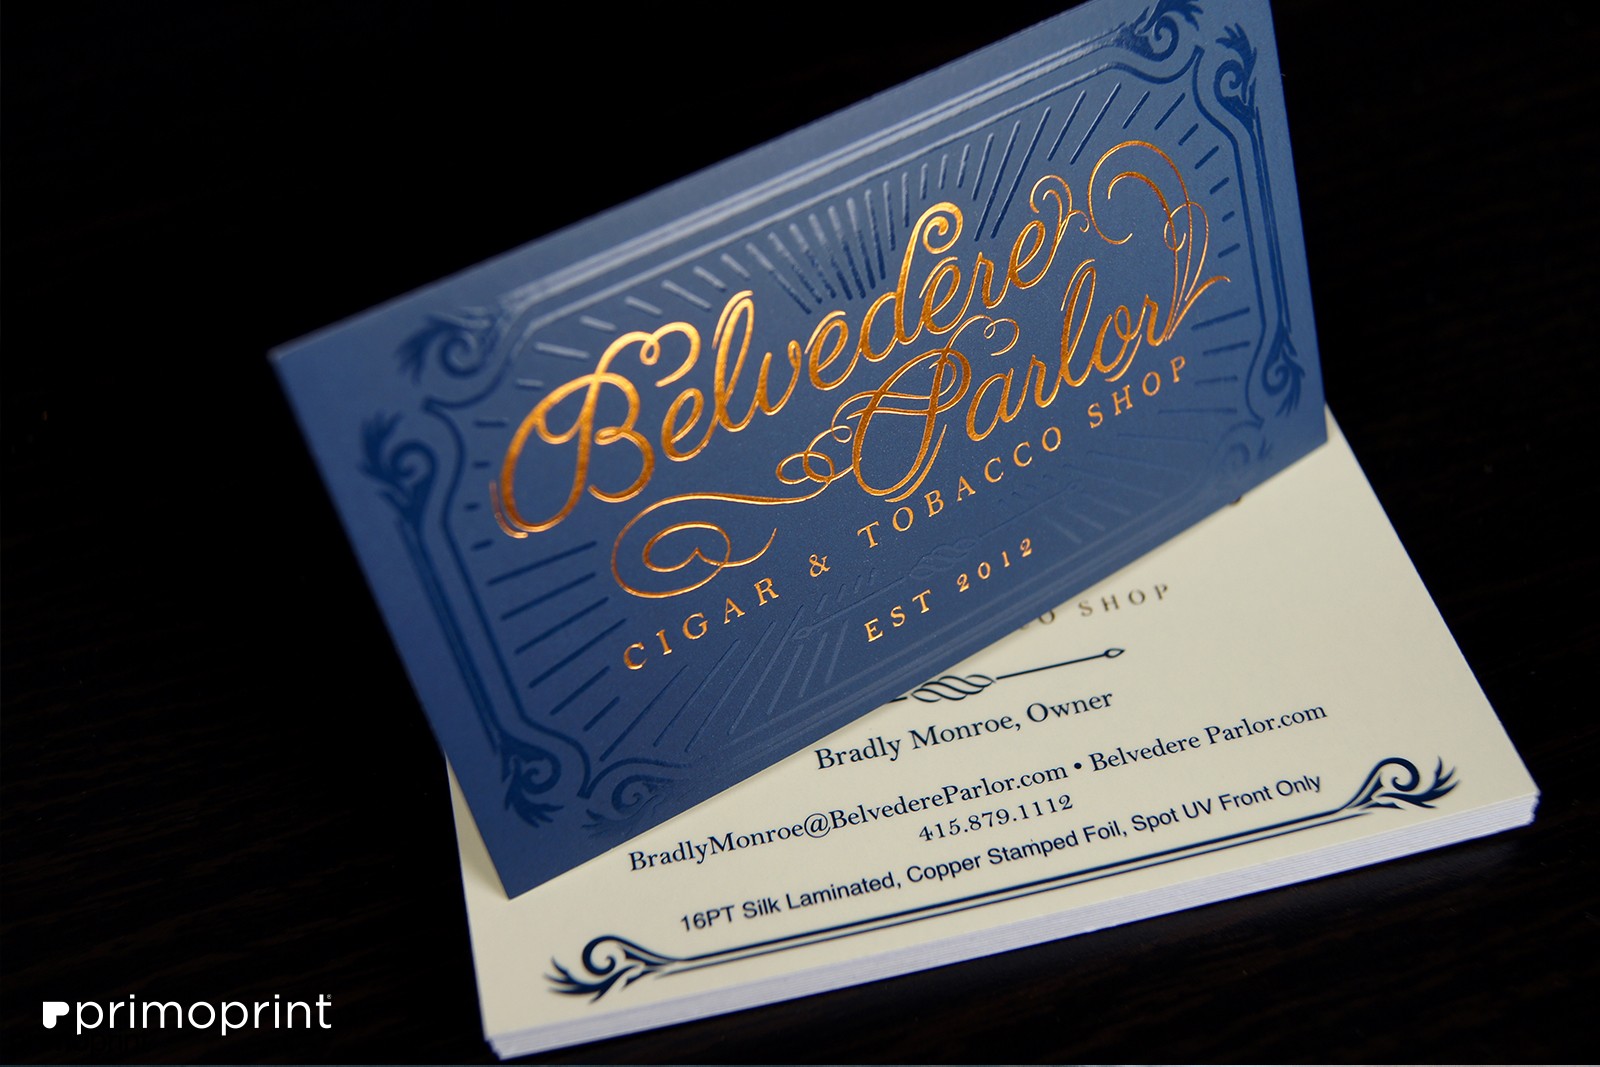 High-end, luxury business cards! These 19pt Silk Laminated Business Cards feature Copper Stamped Foil and a beautiful Spot UV design on the front.